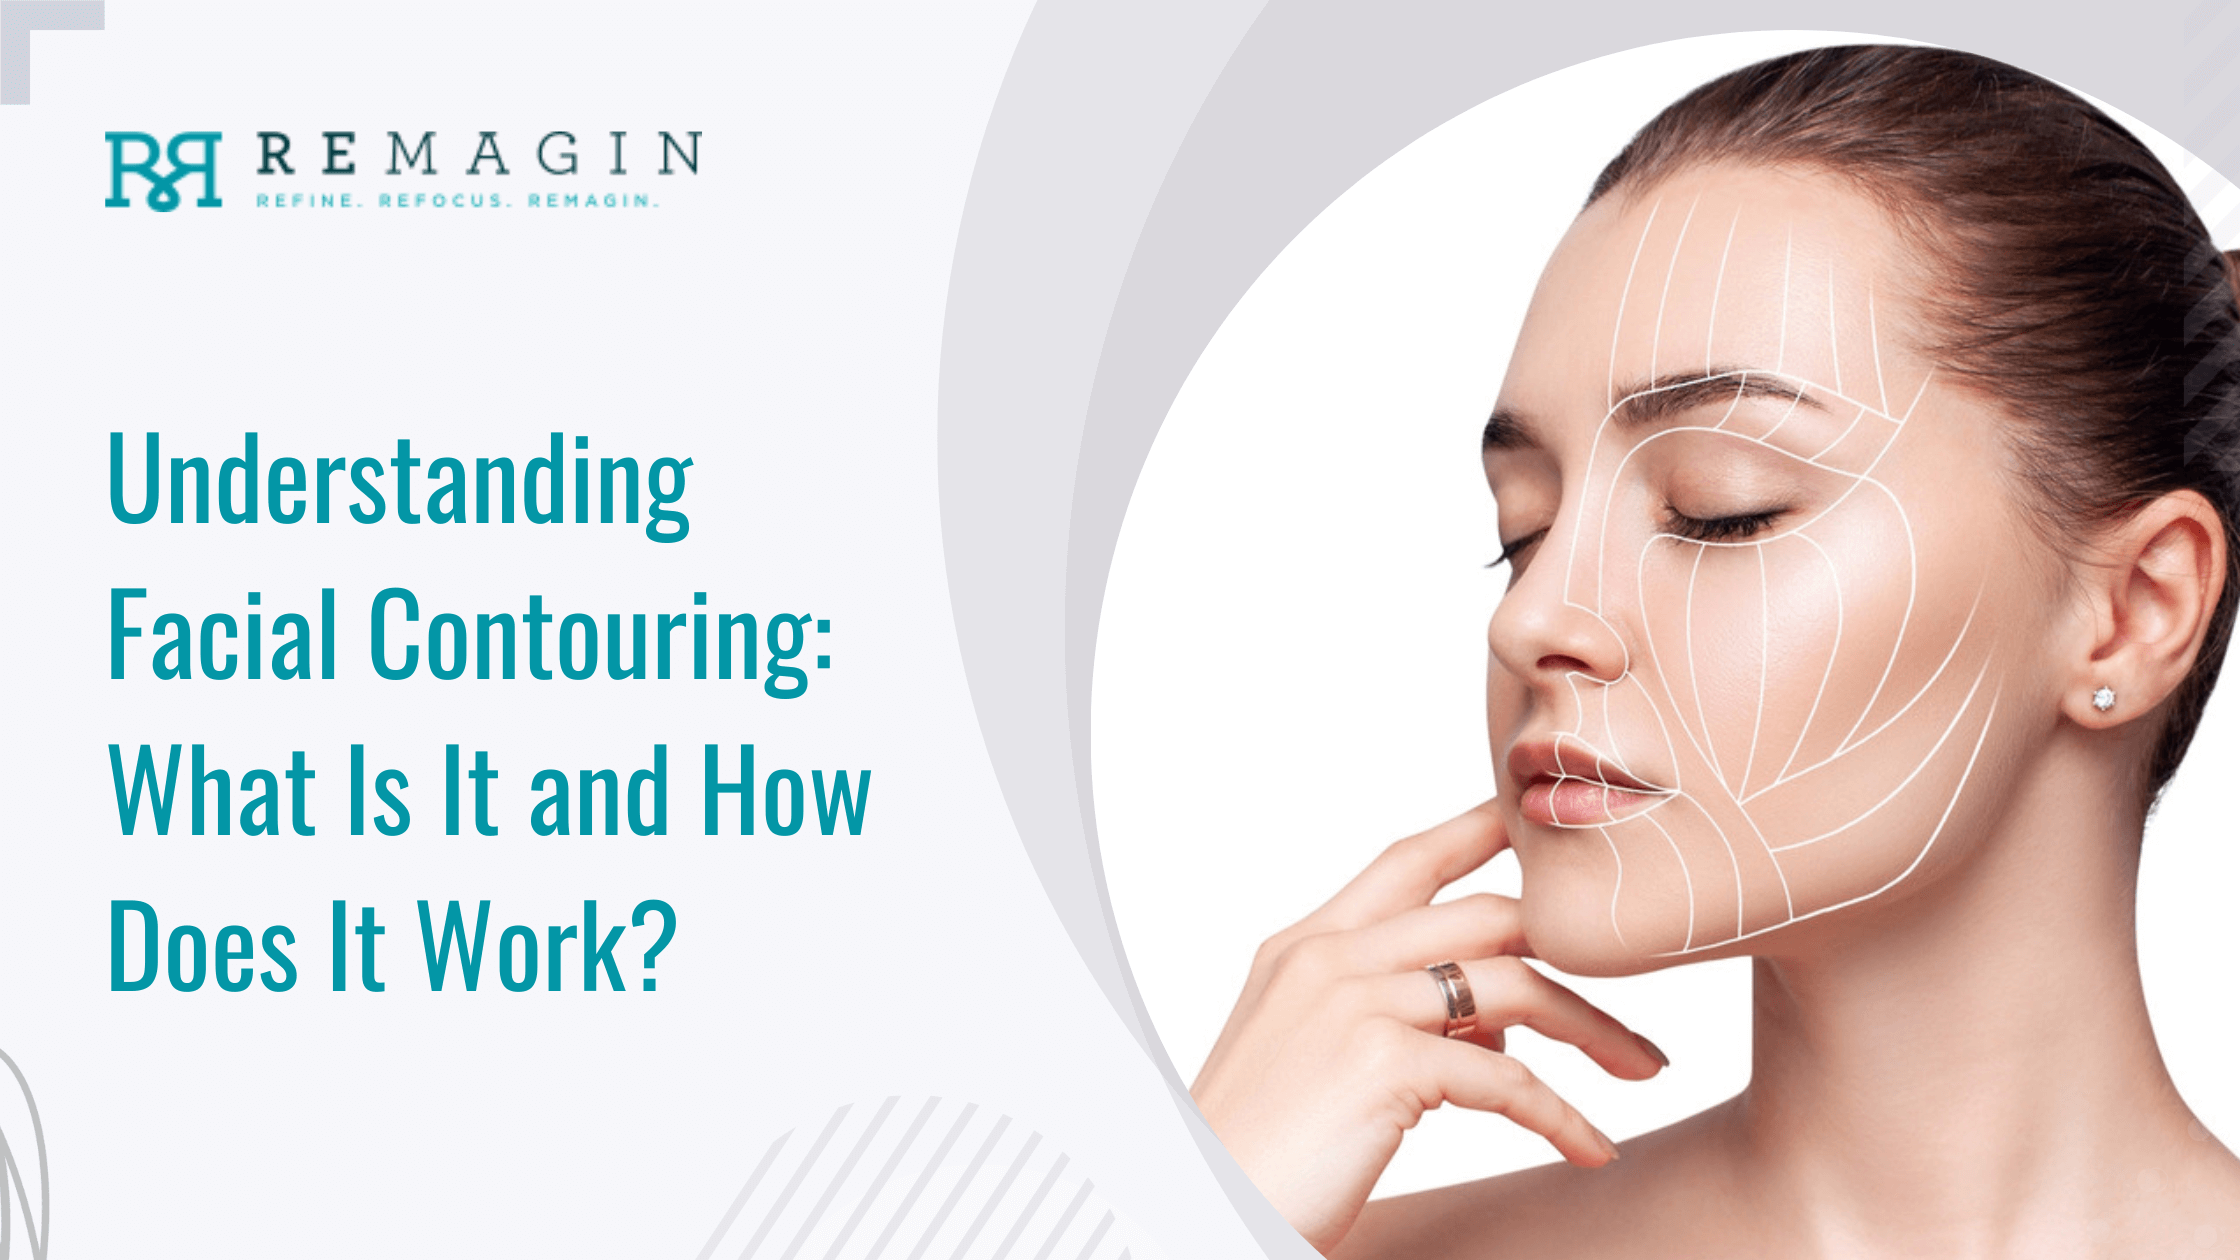 Understanding Facial Contouring: What Is It and How Does It Work?